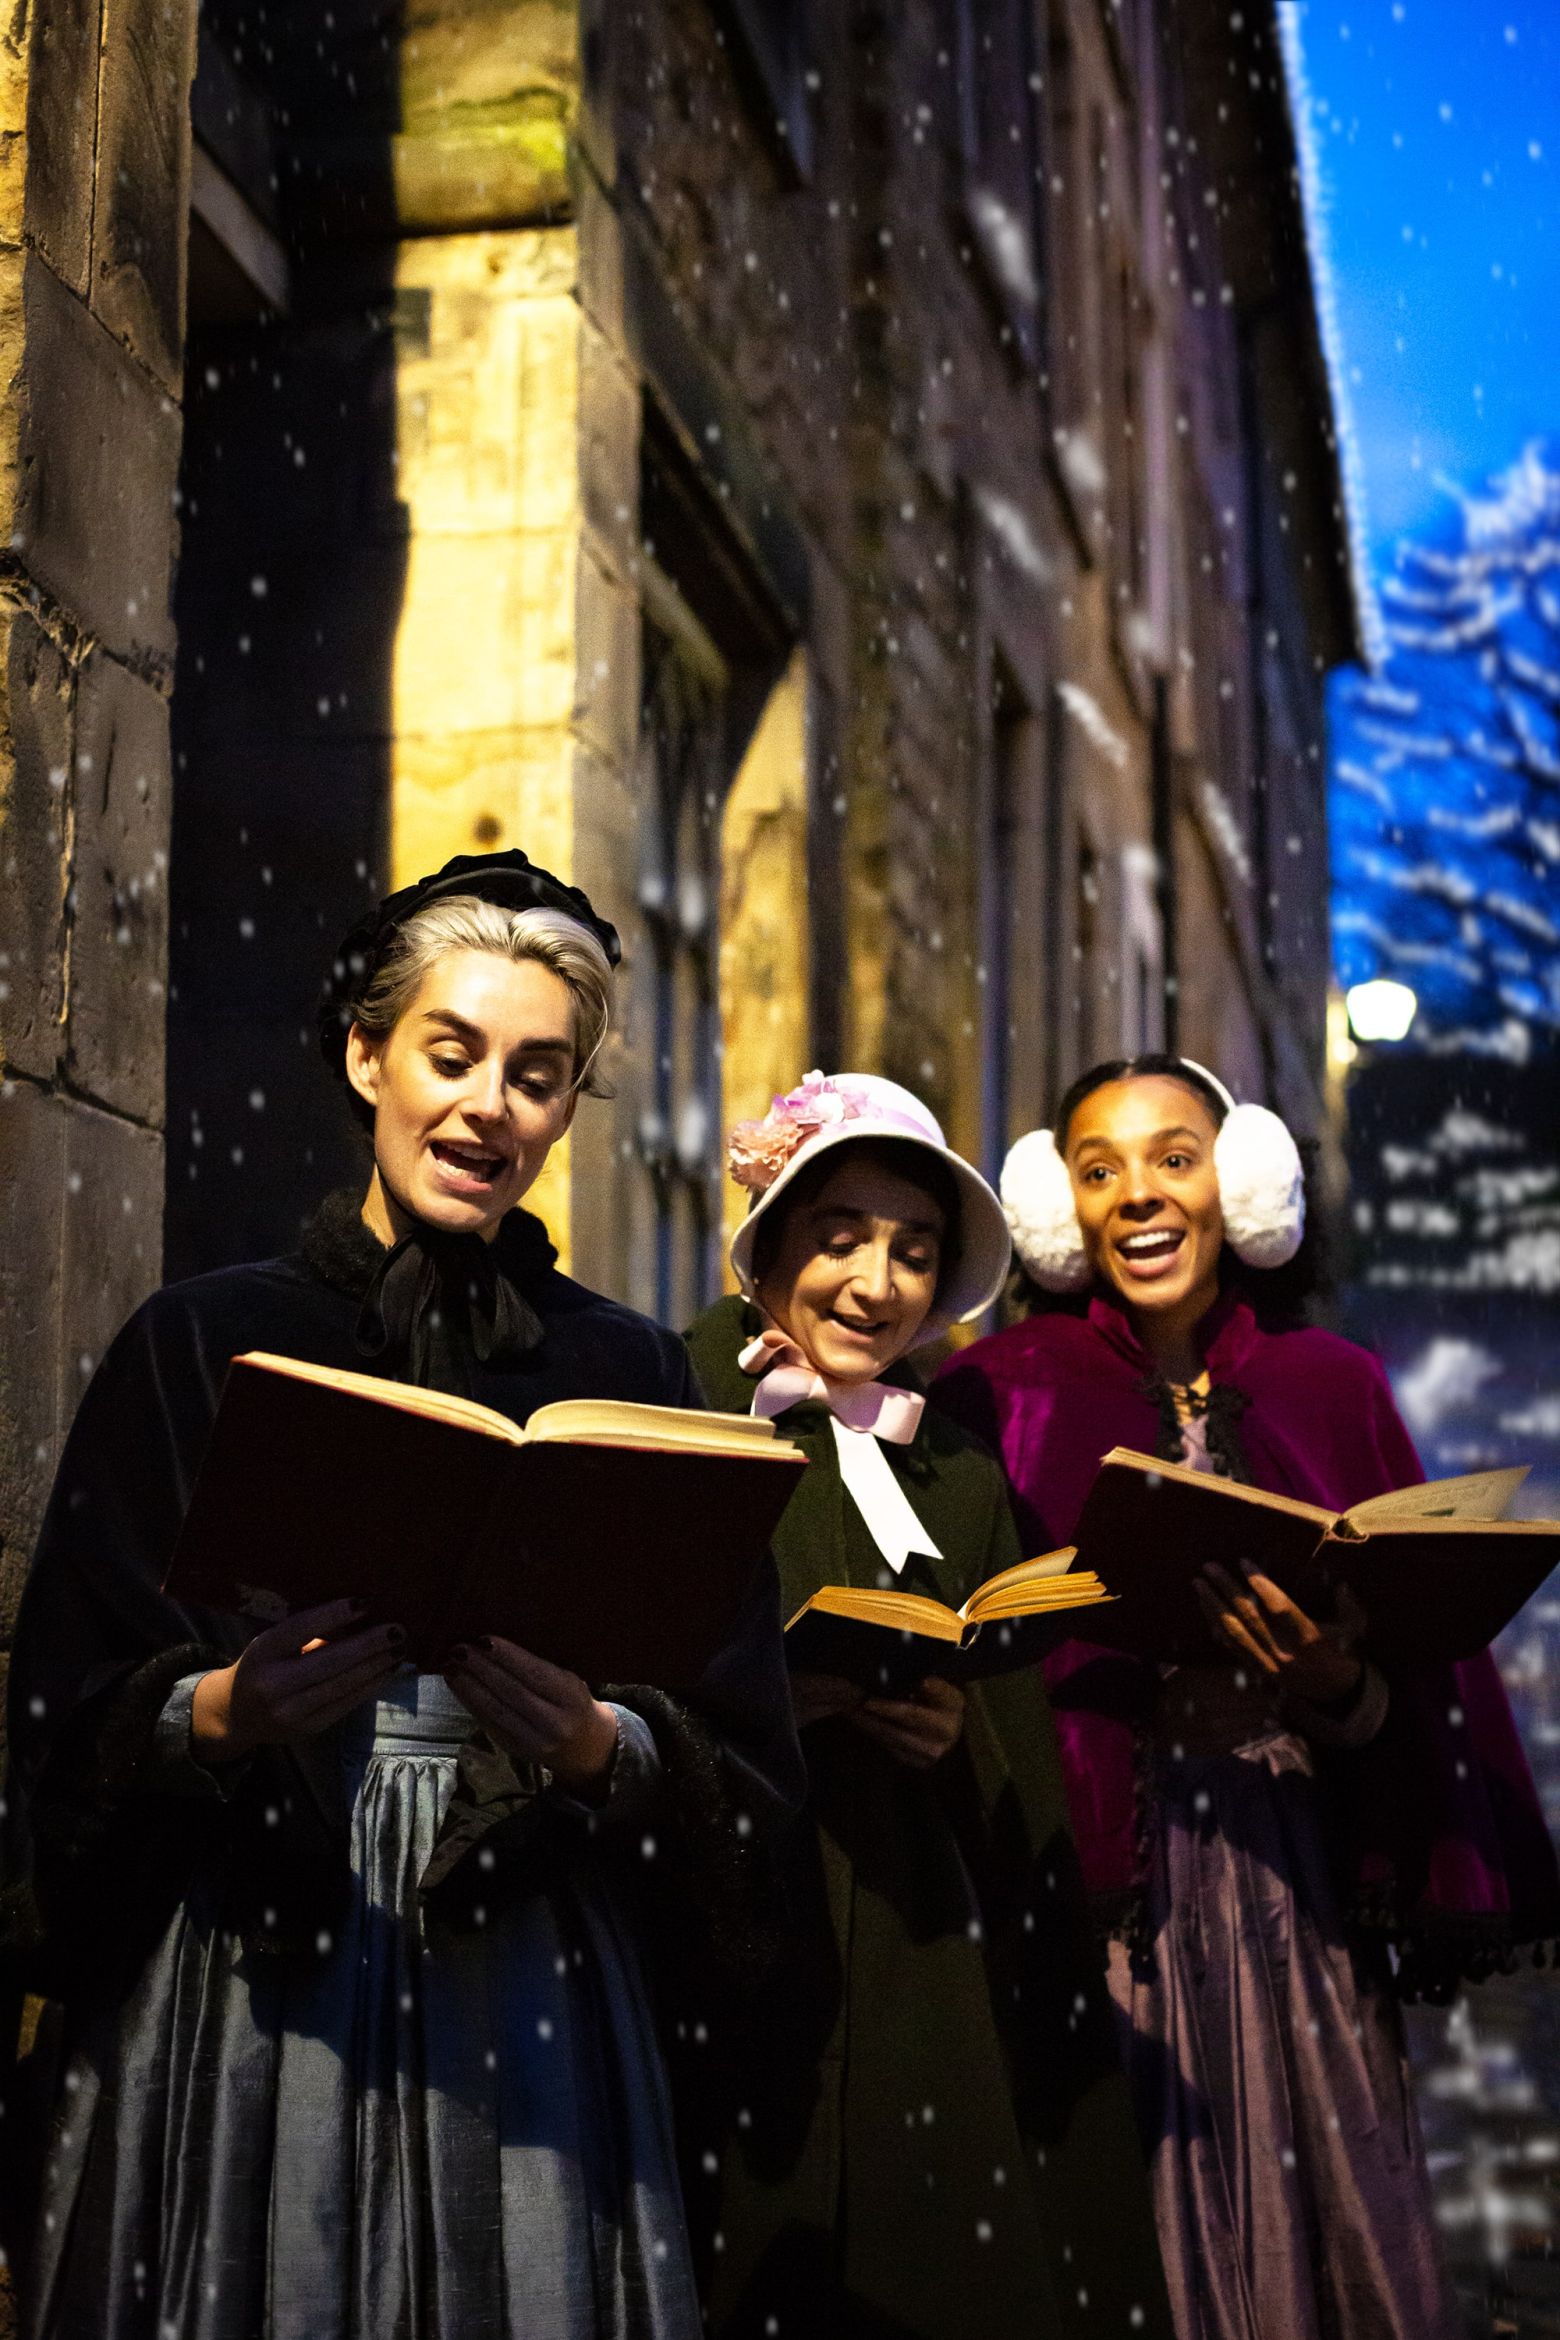 Three carol singers, singing outside in the snow